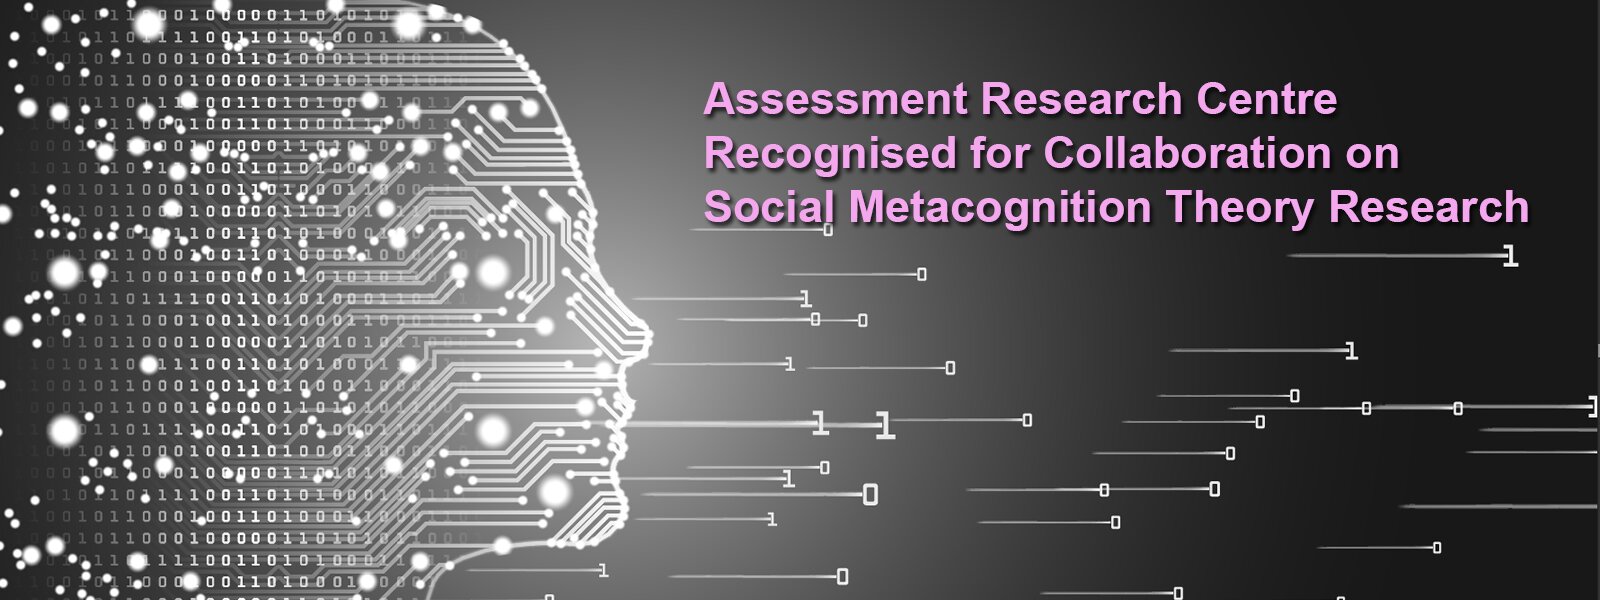 Assessment Research Centre Recognised for Collaboration on Social Metacognition Theory Research